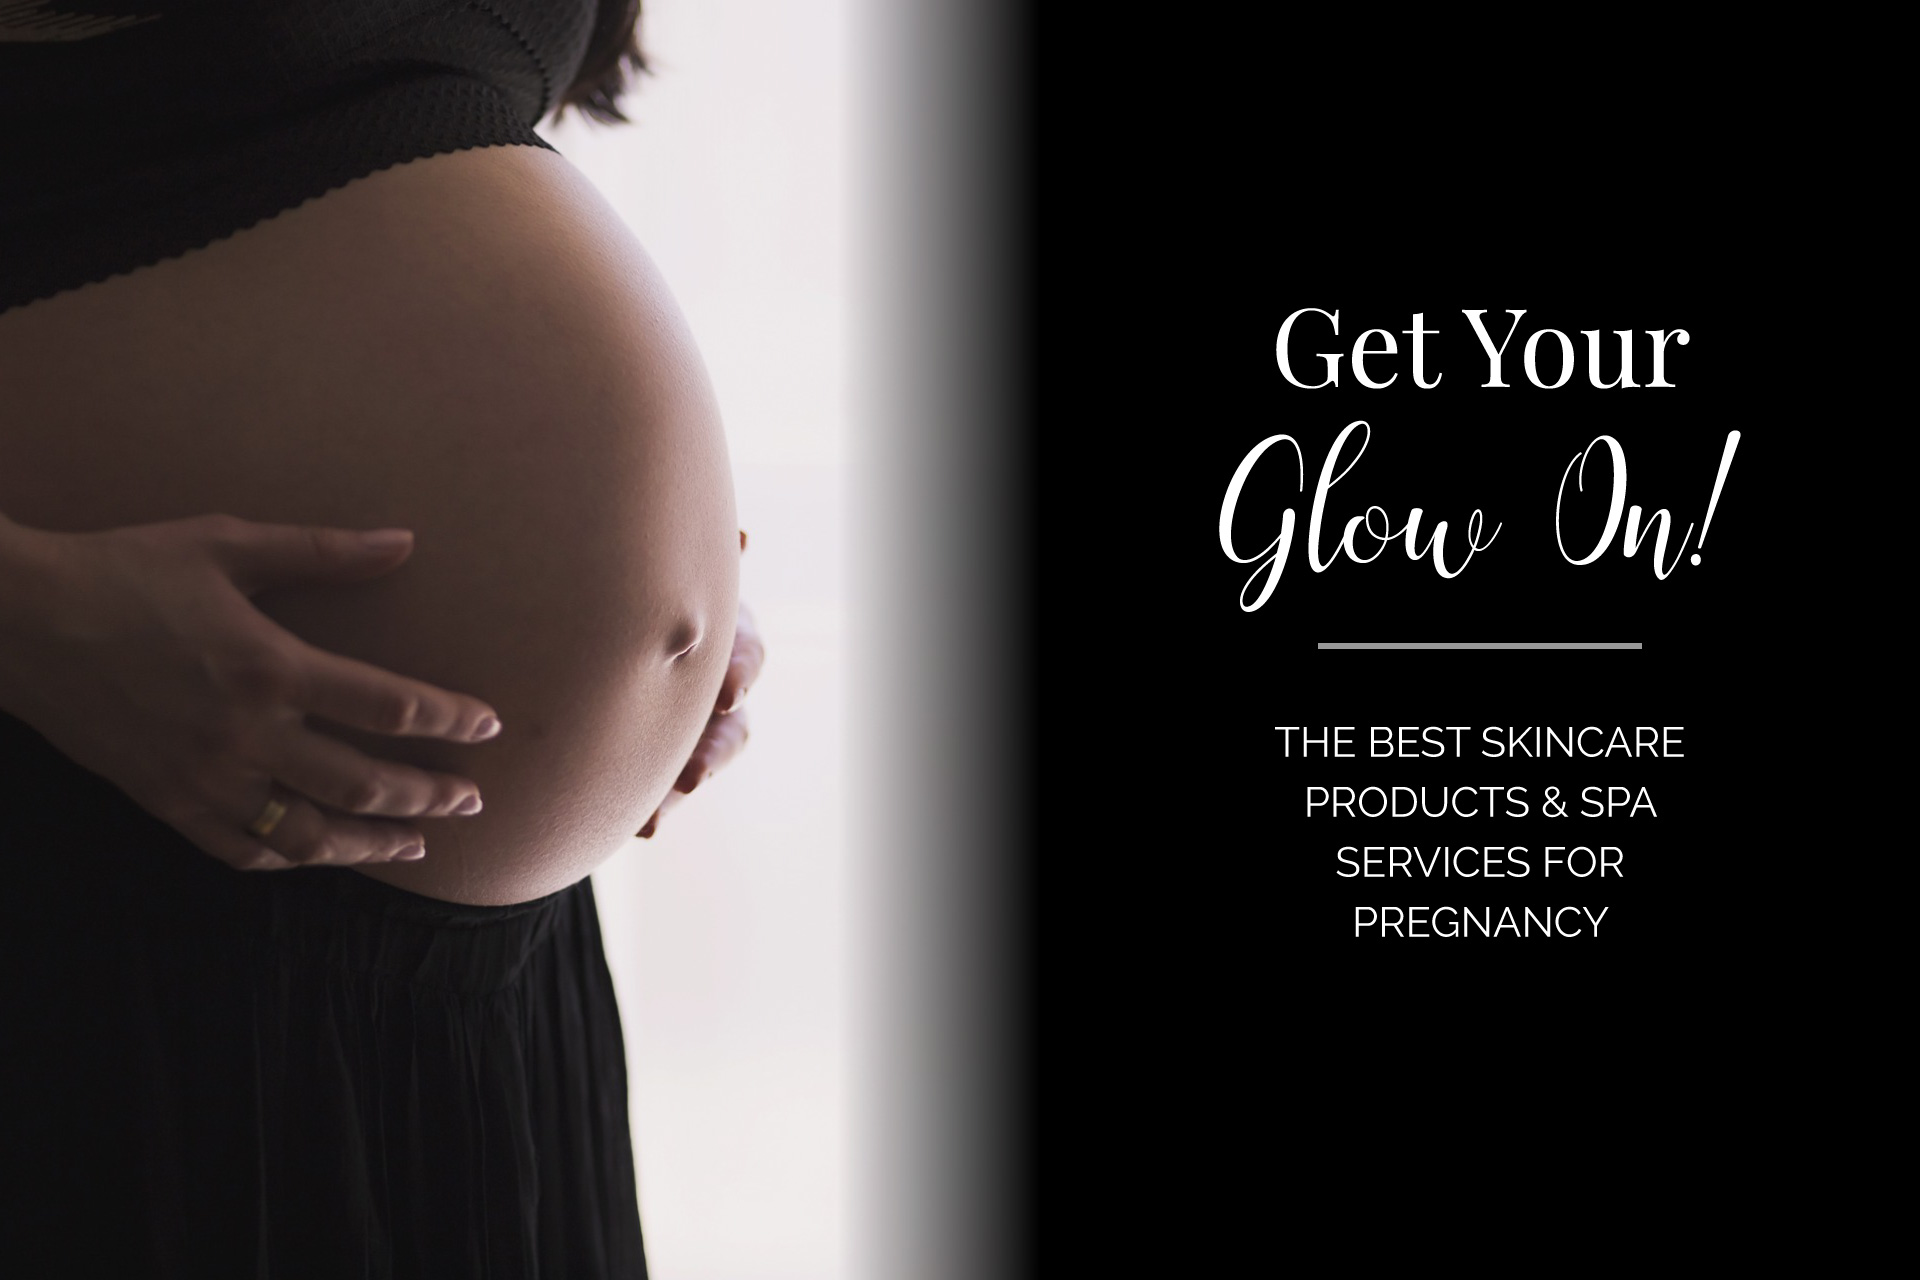 The Best Skincare Products and Spa Services for Pregnancy